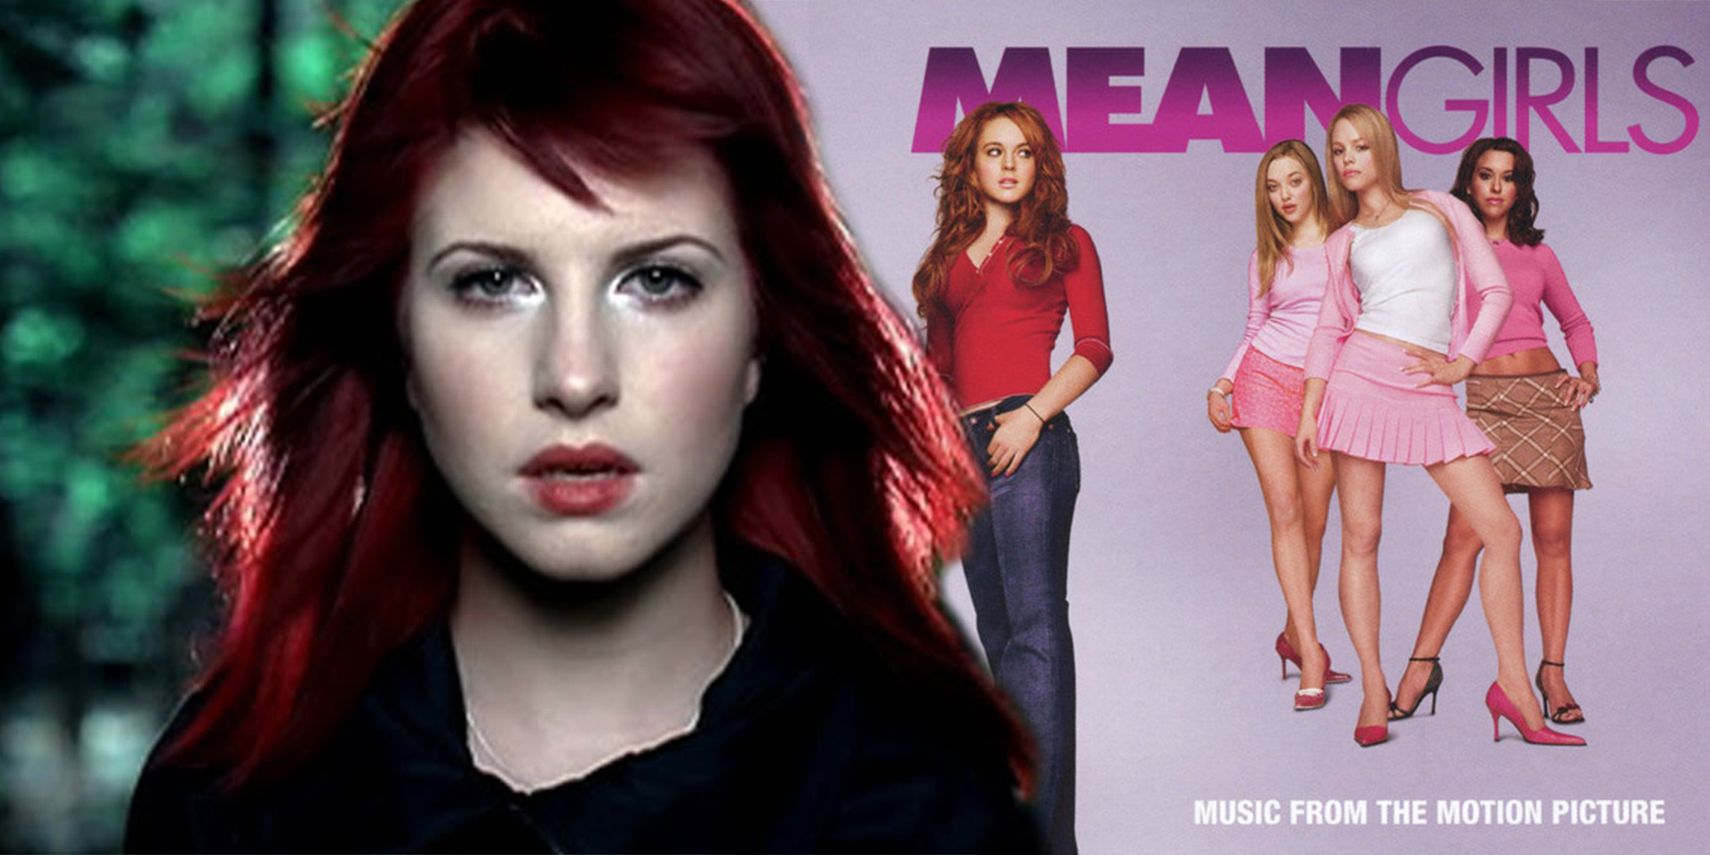 Paramore in the Decode video and the Mean Girls film poster